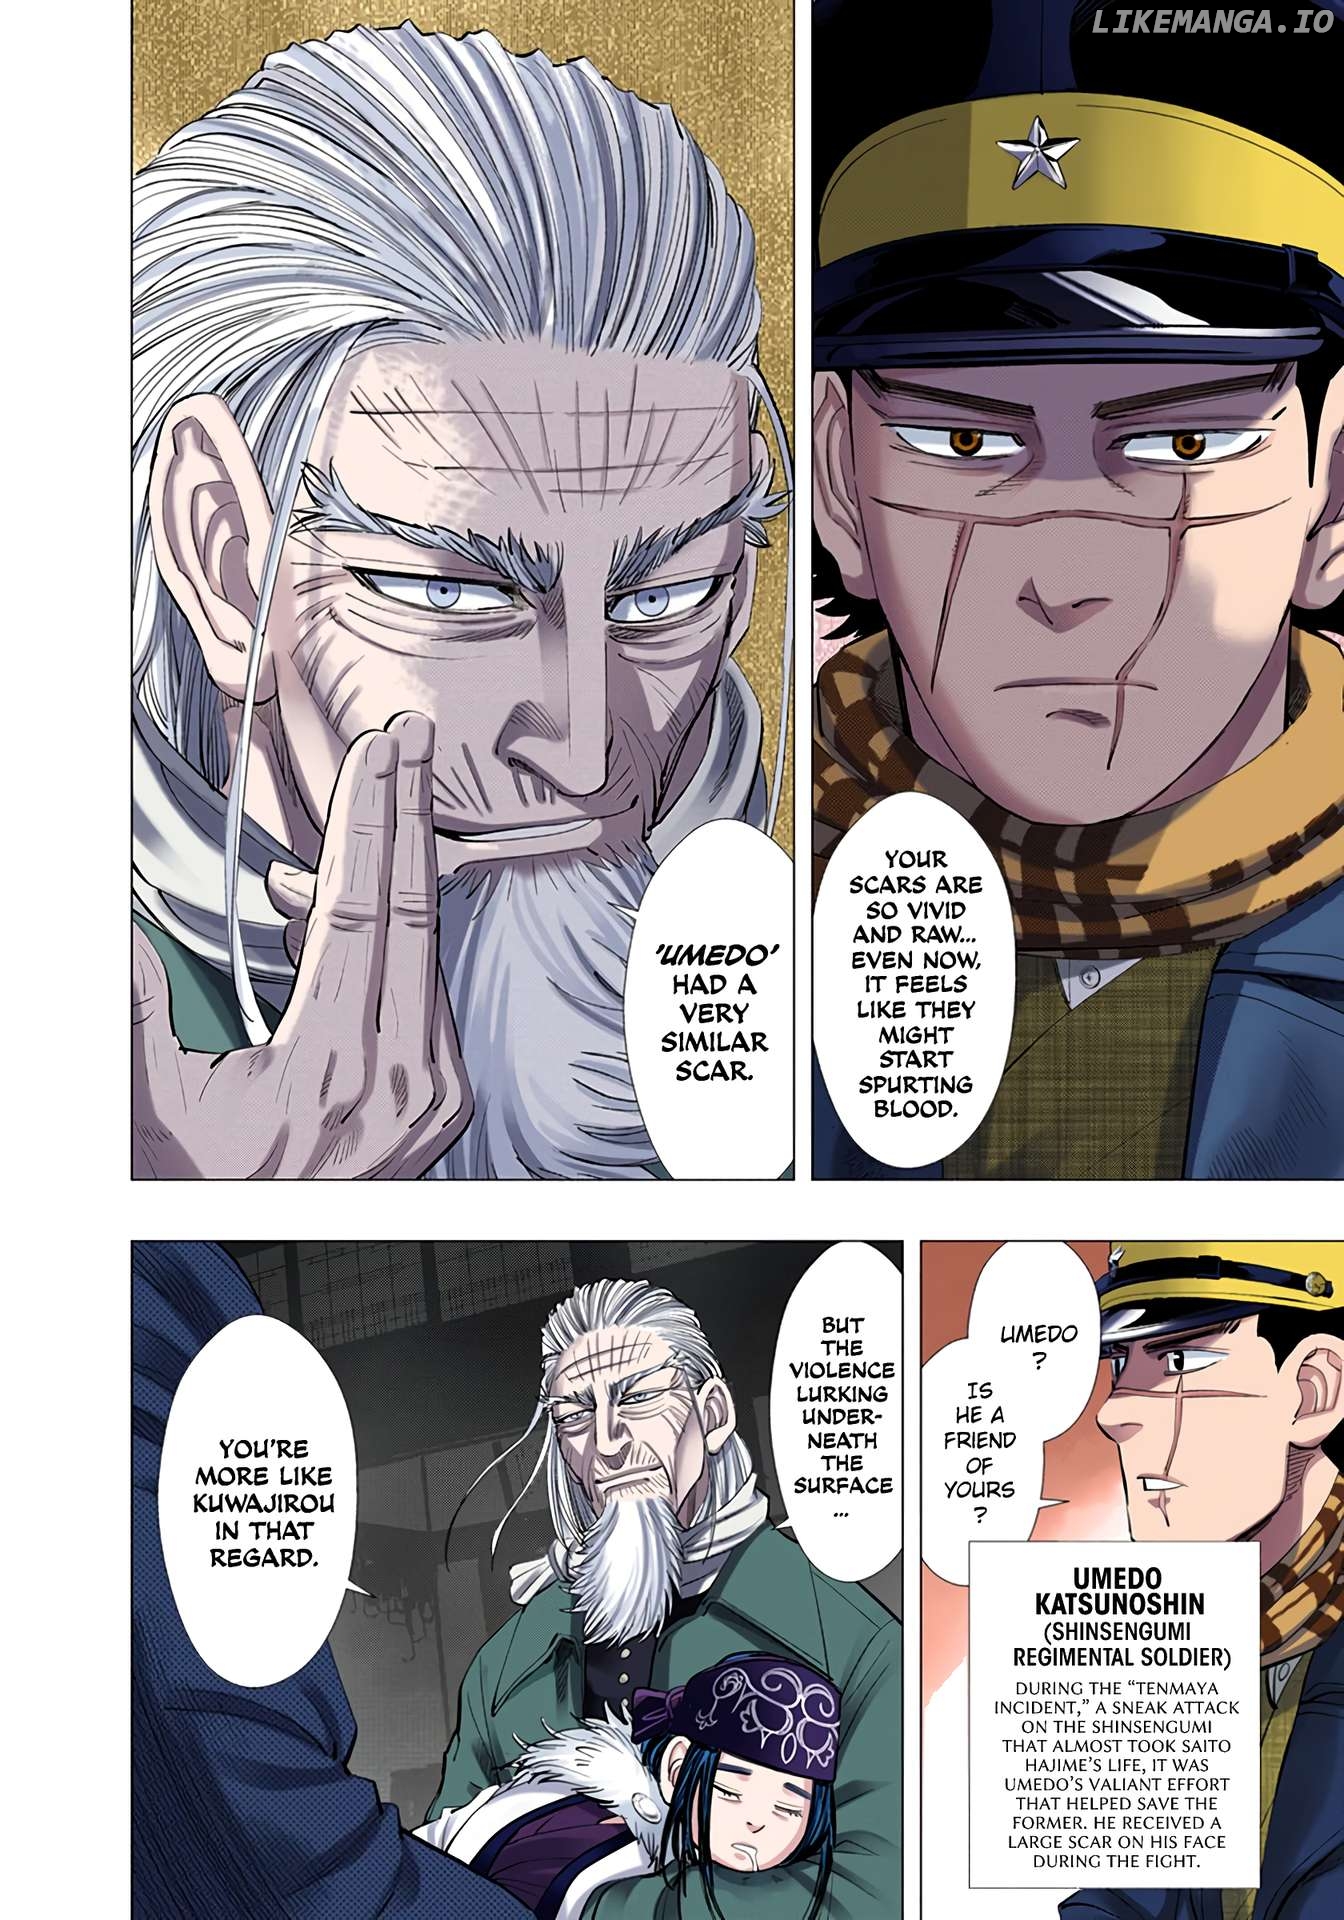 Golden Kamuy - Digital Colored Comics Chapter 44 - page 4